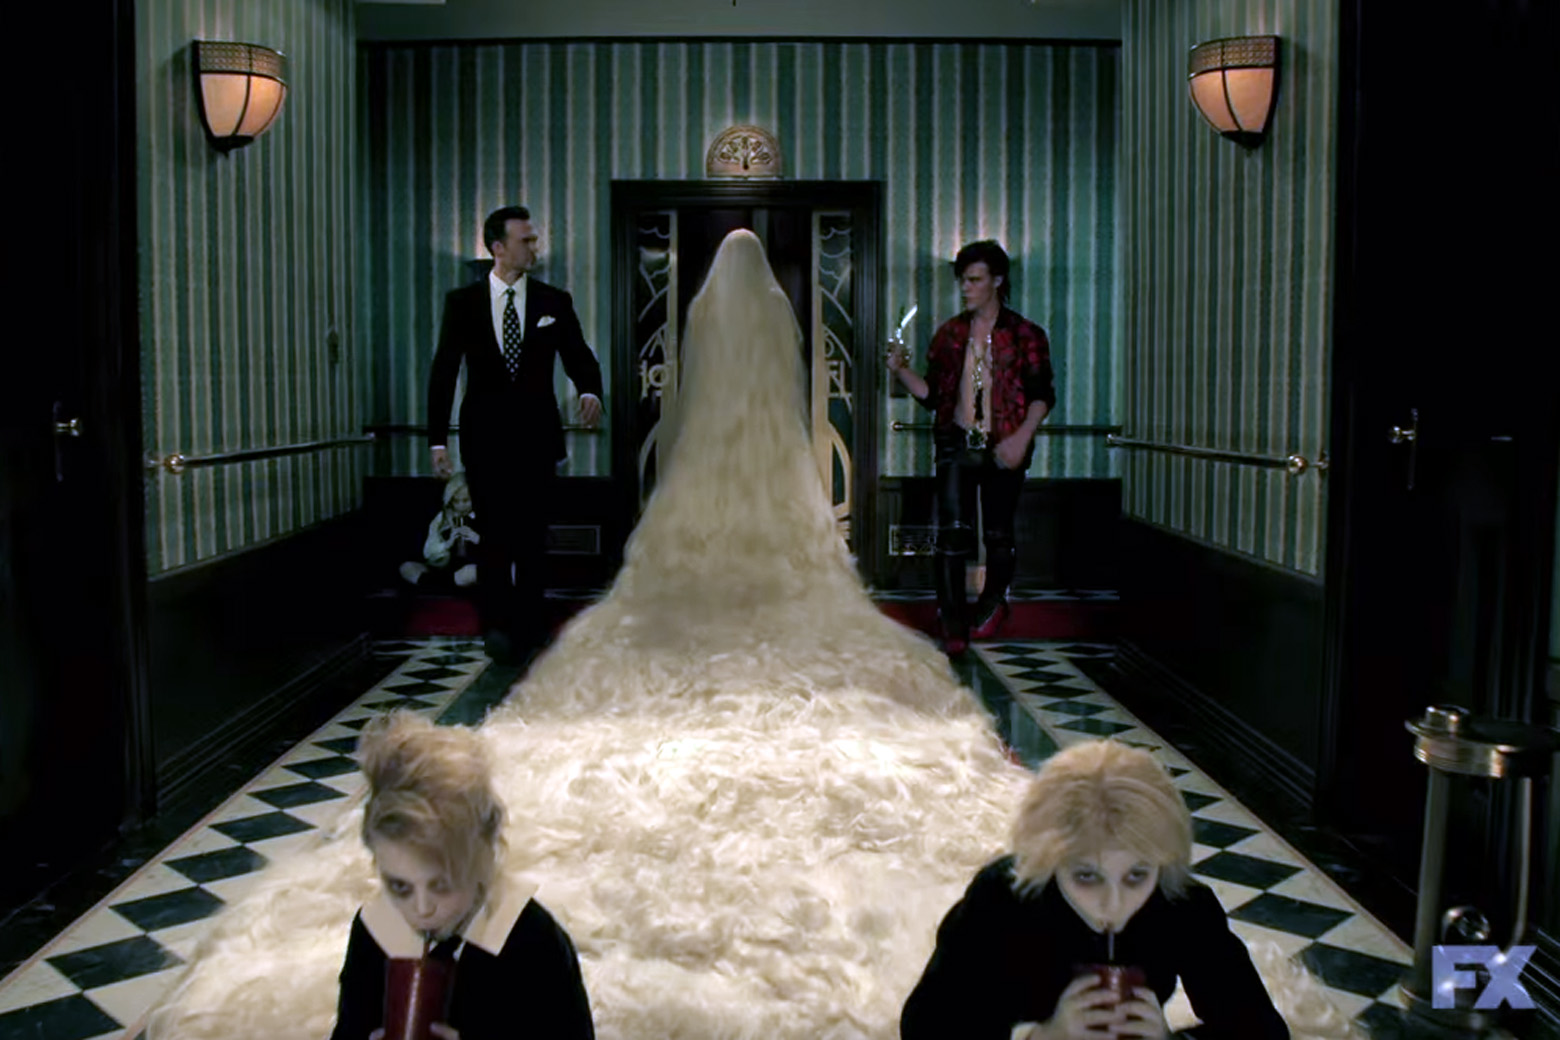 ‘American Horror Story’ checks into ‘Hotel’ as we check out